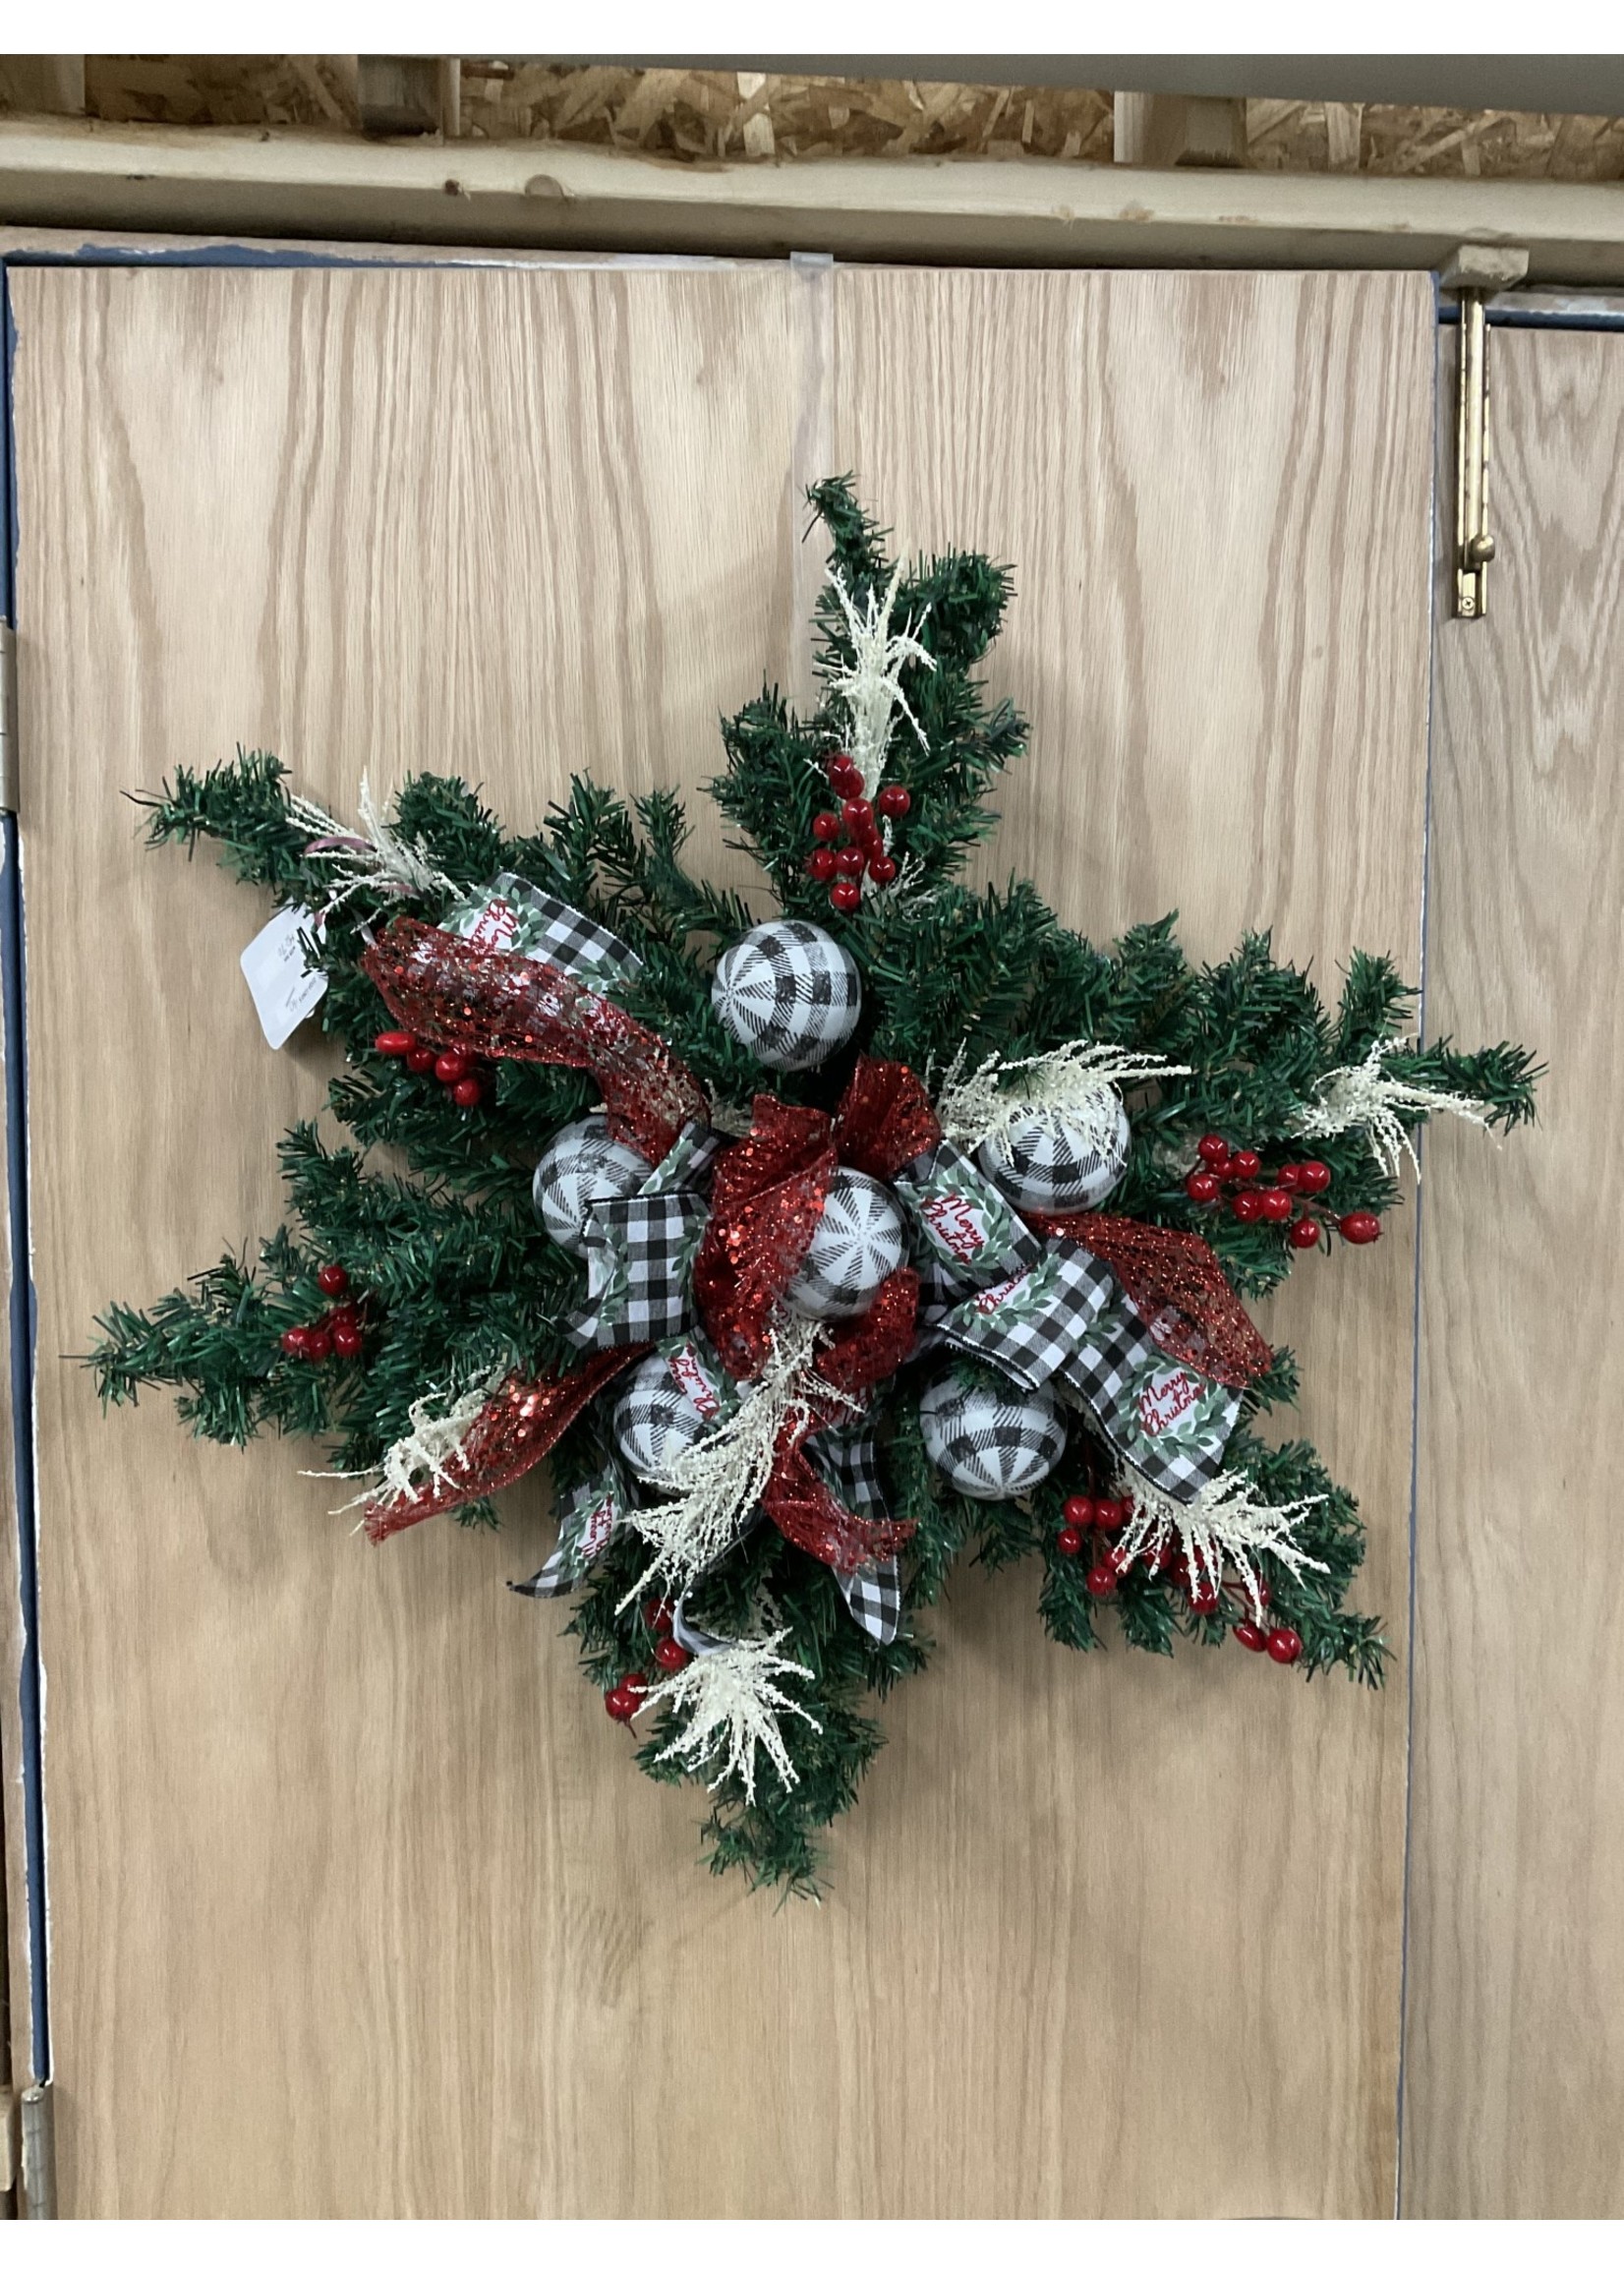 My New Favorite Thing Wreath Star Evergreen 27 in-Black Buffalo Check Ornaments